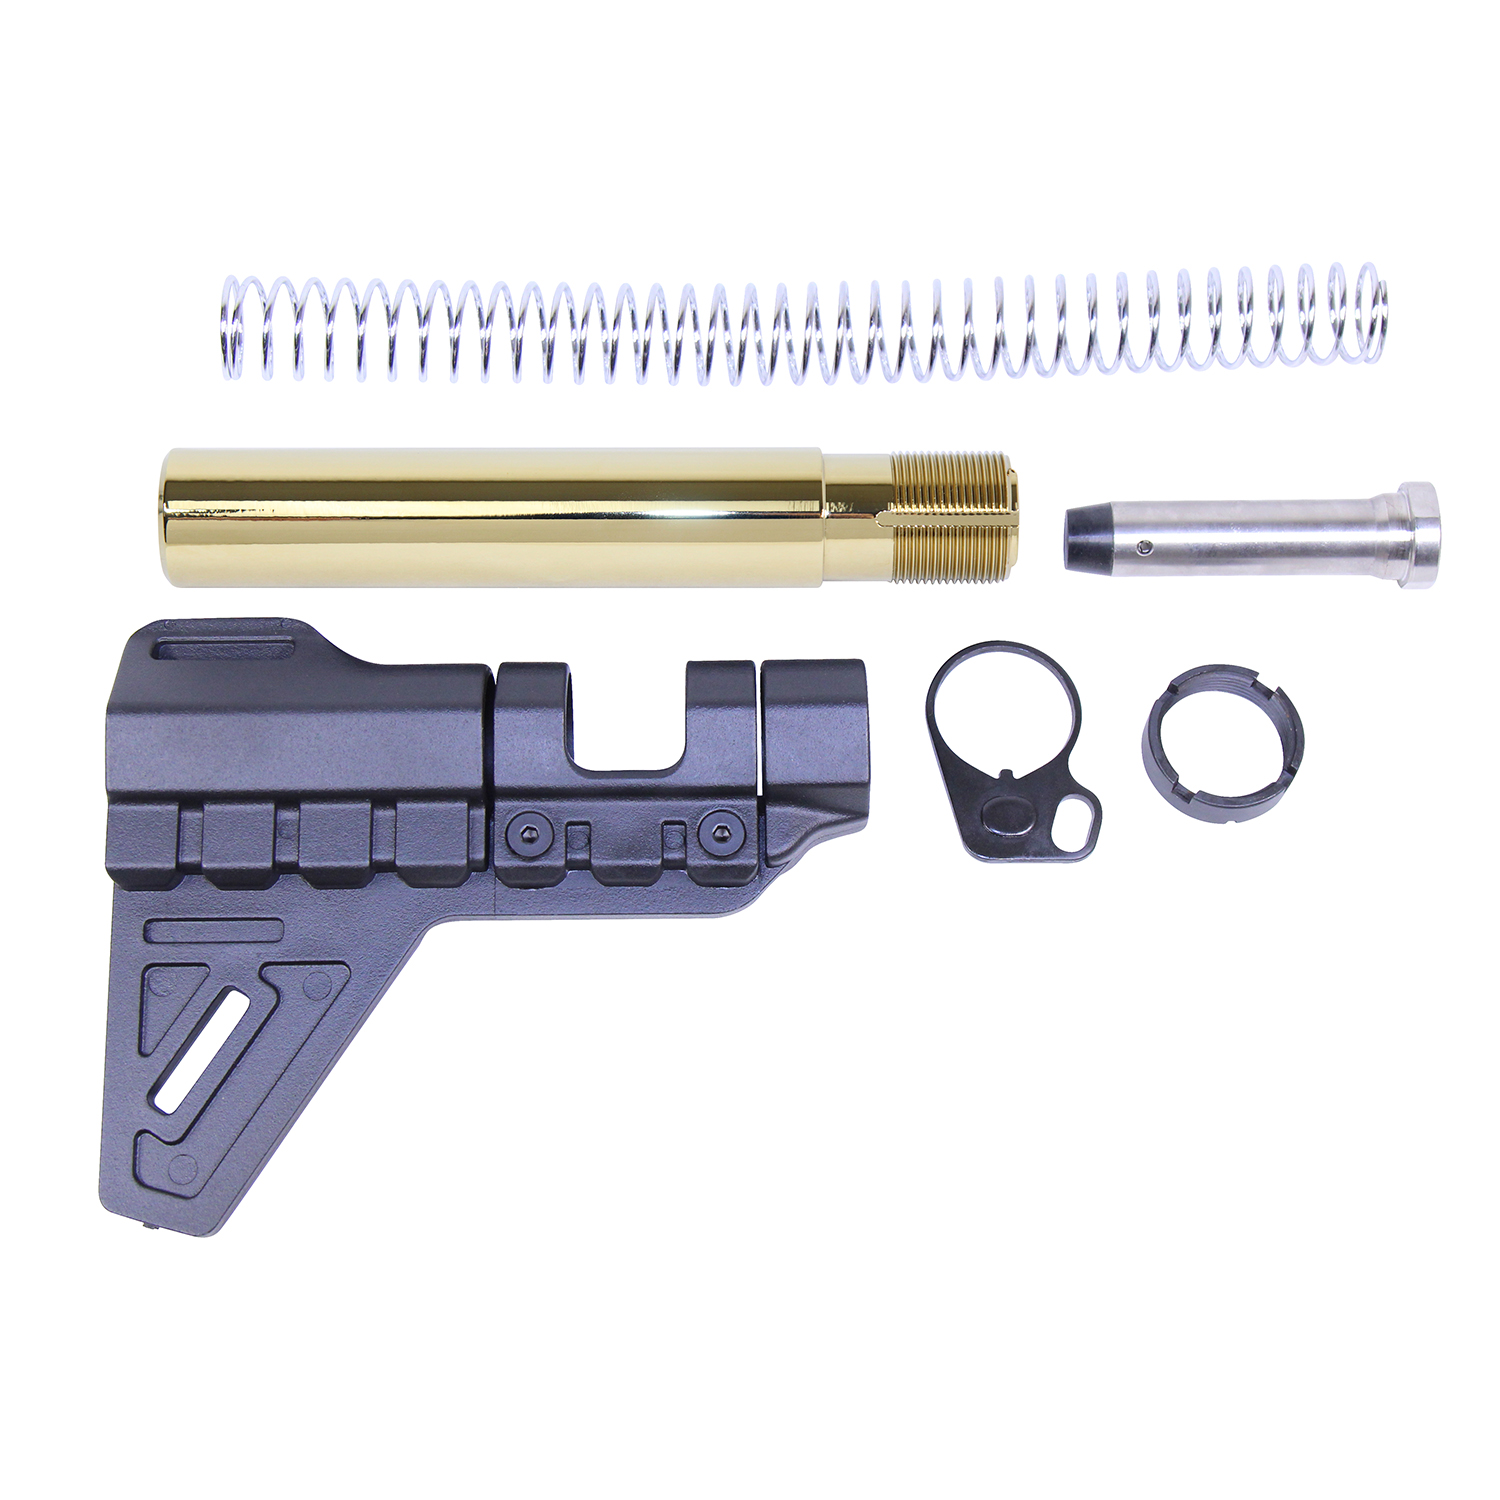 Gold Plated AR-15 Pistol Brace Kit Components Displayed.